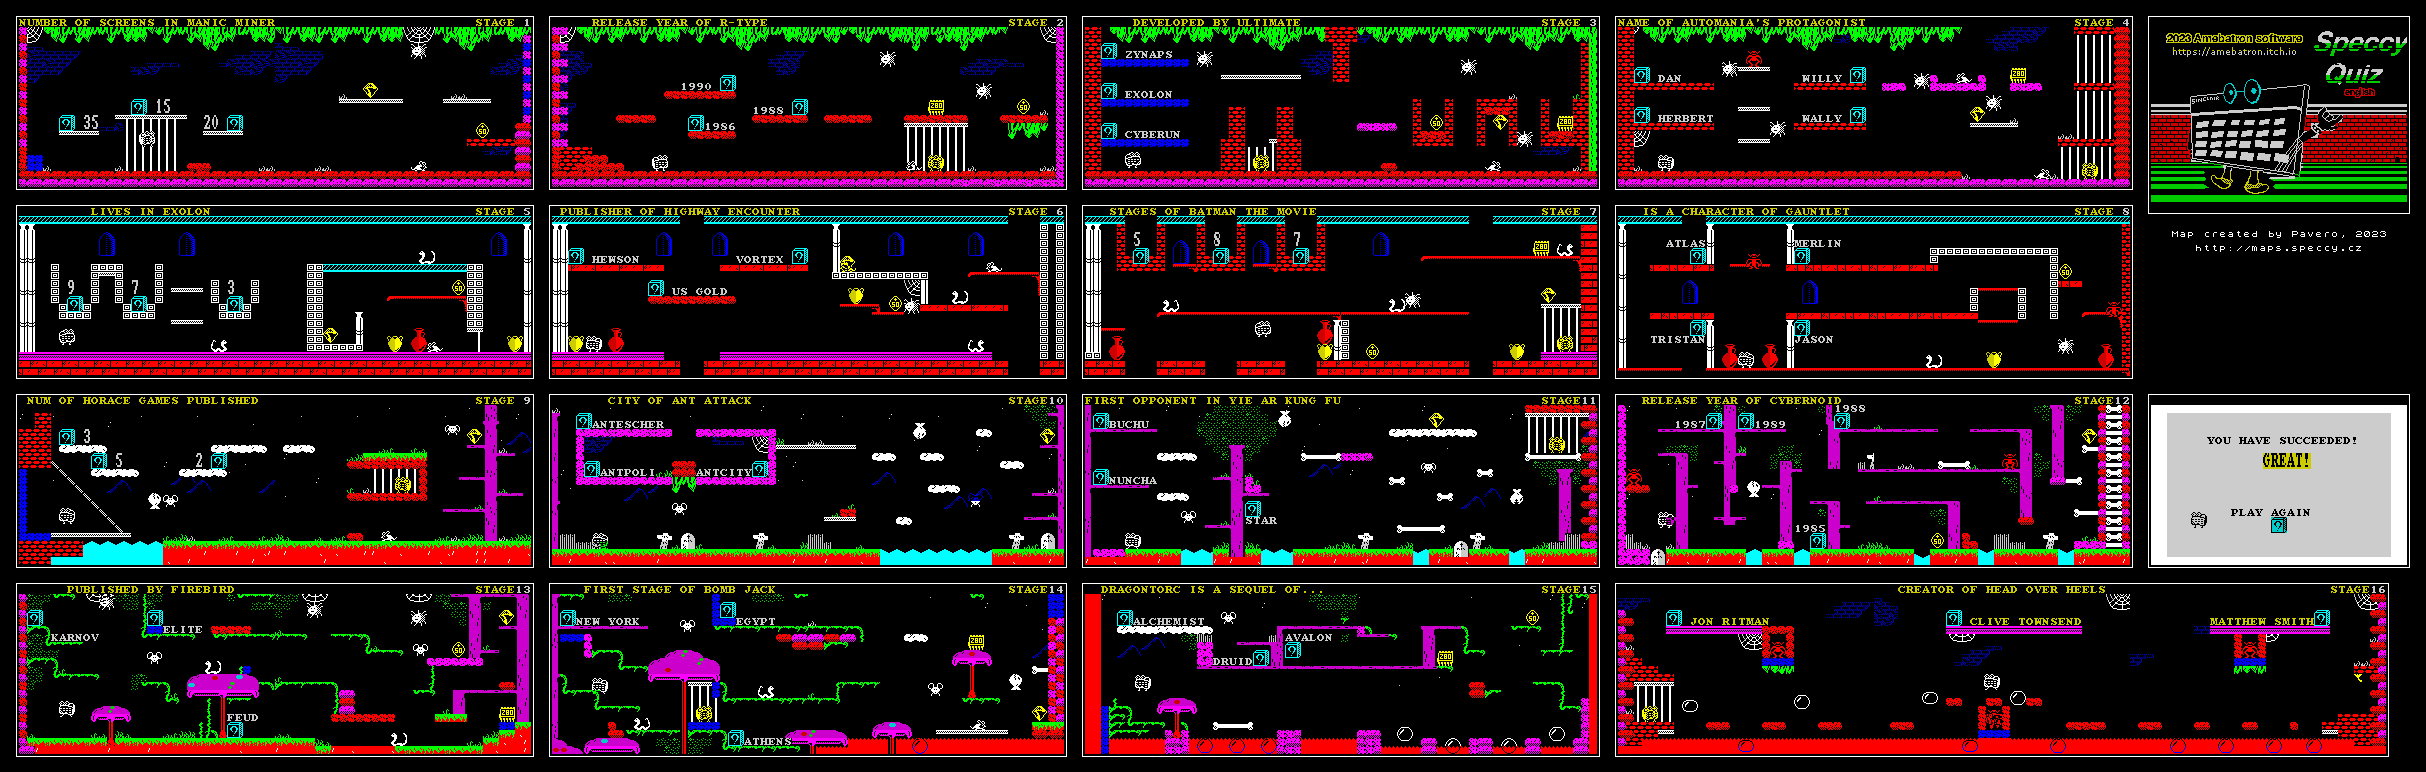 Speccy Quiz - The Map